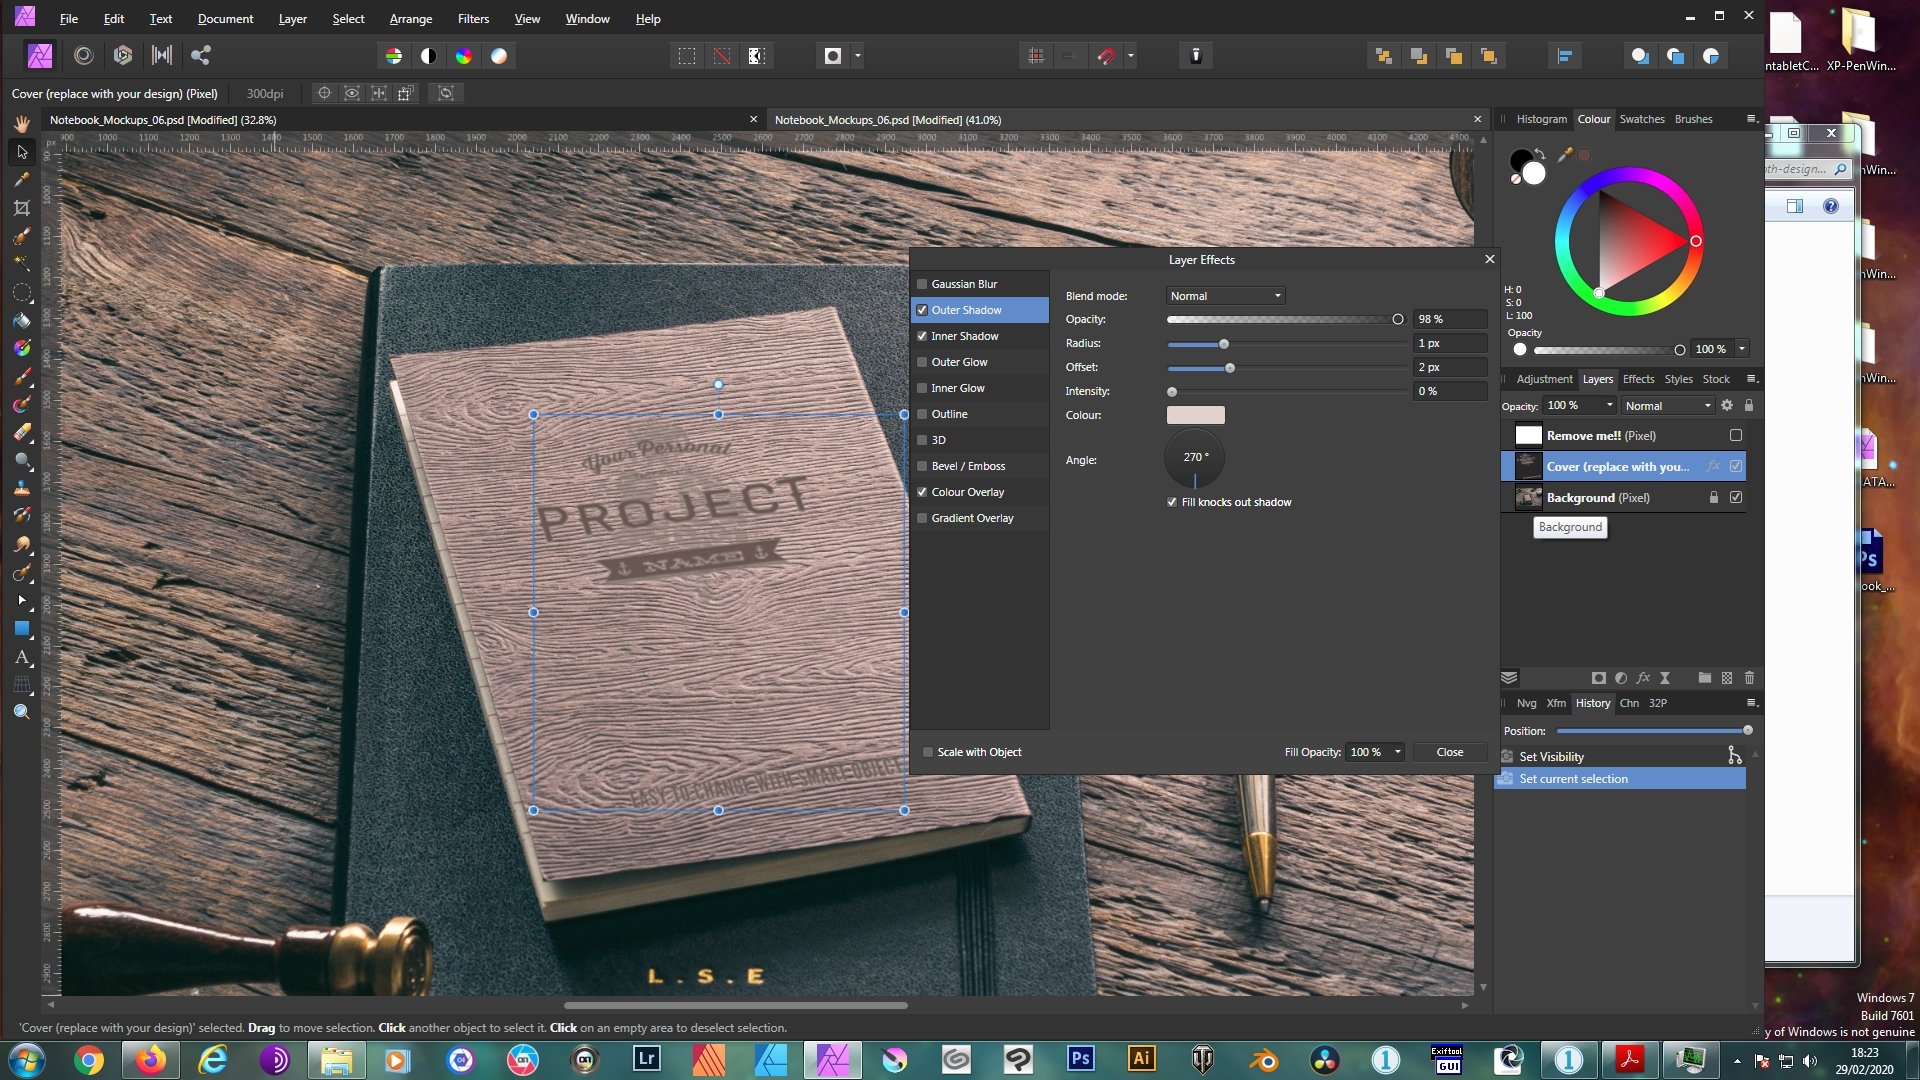 Download Psd Mockup With Smart Objects Layer Effects Fx Not Imported Photo Bugs Found On Windows Affinity Forum PSD Mockup Templates